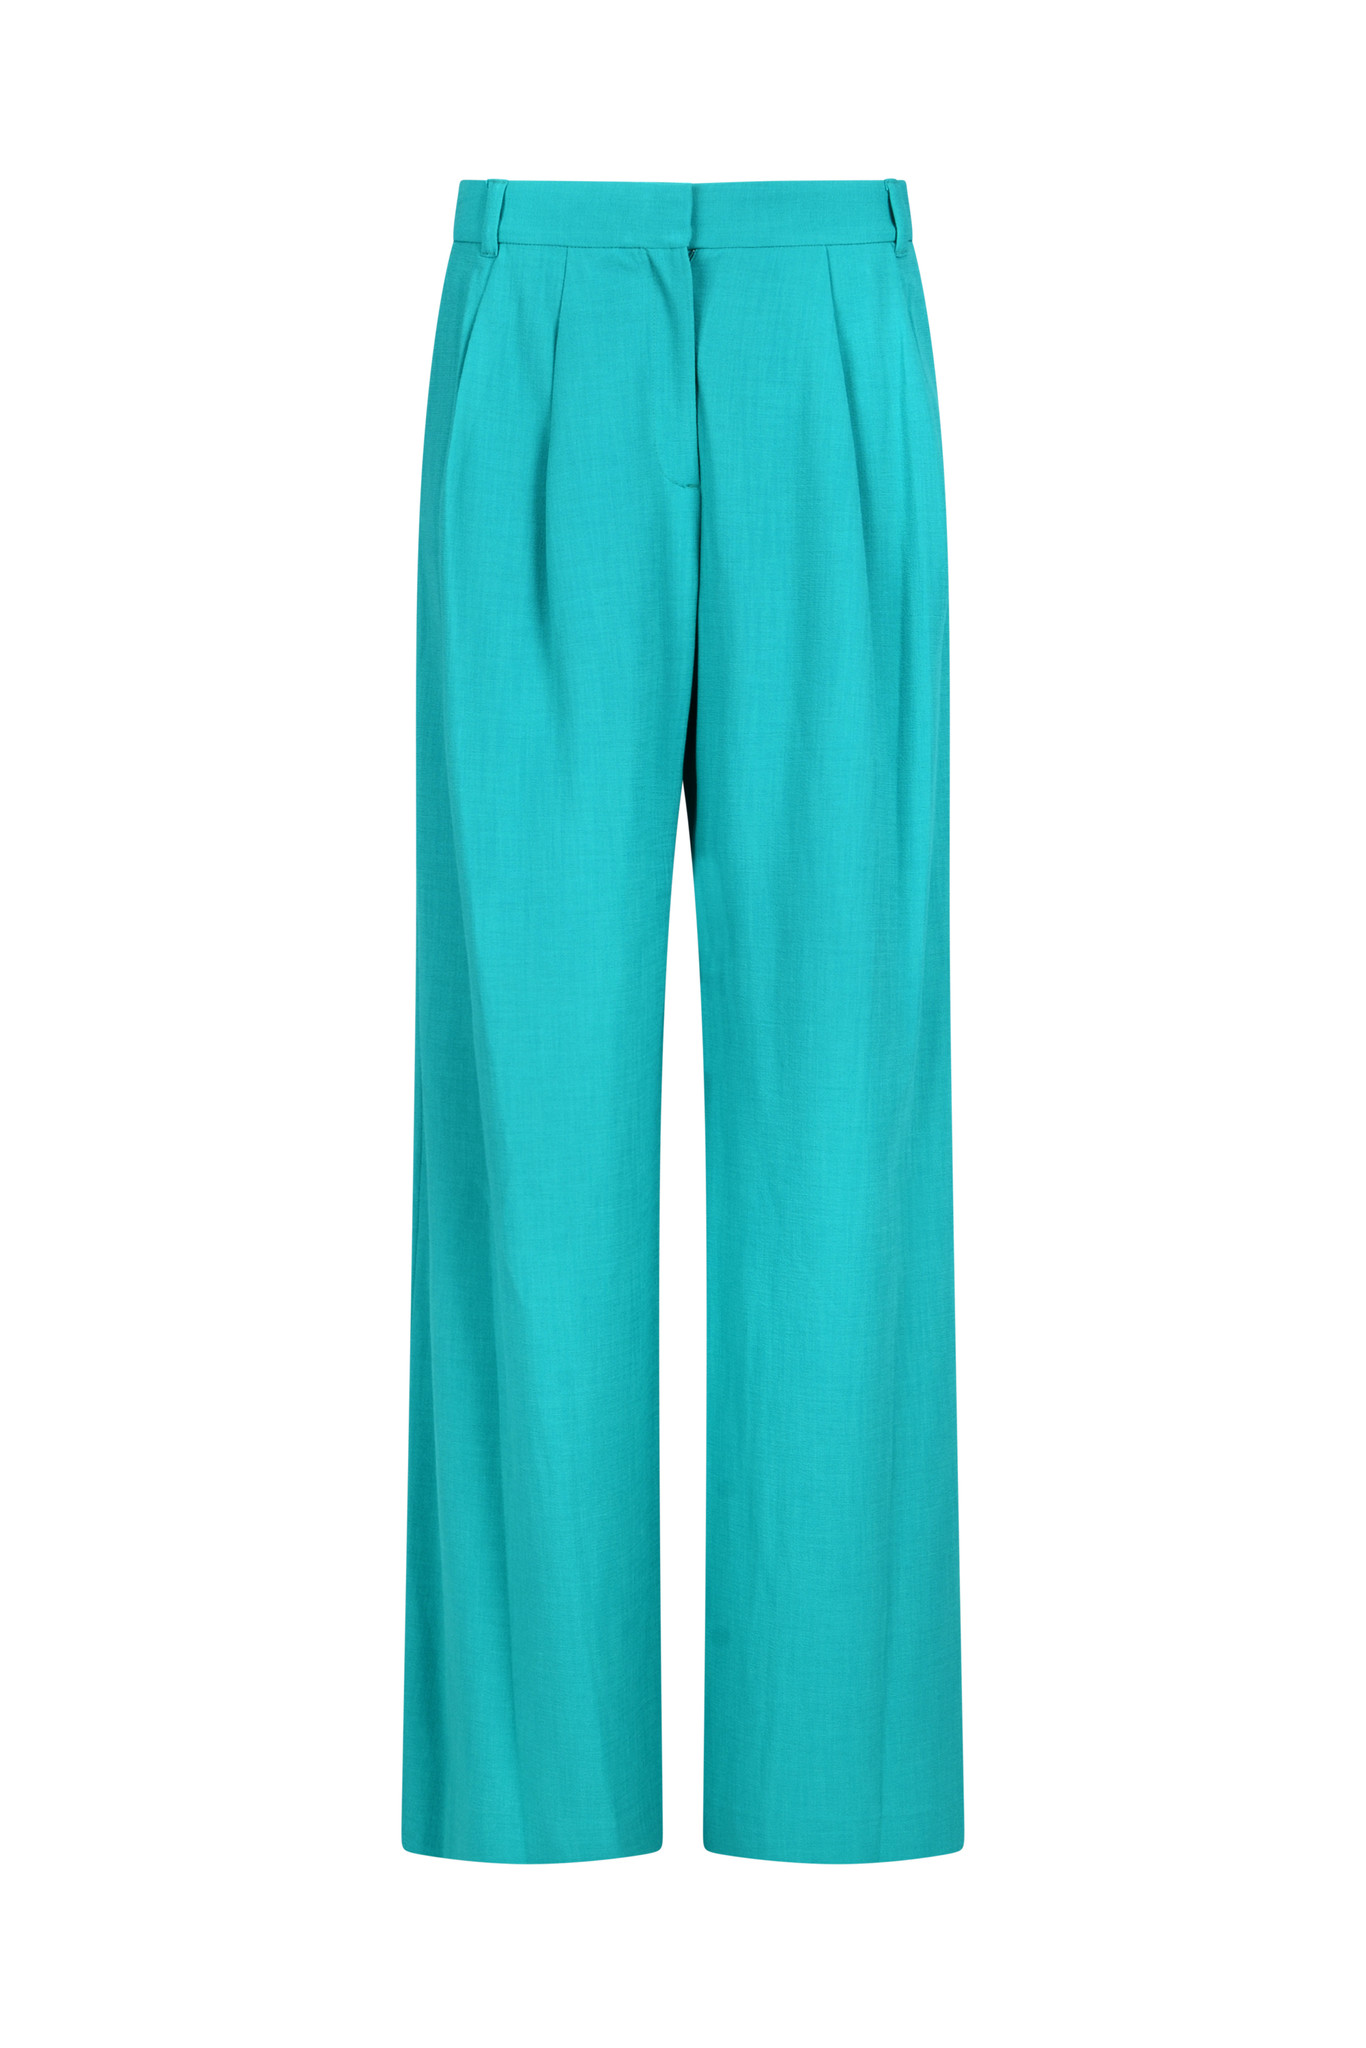 Nino Trousers in Teal Blue-1